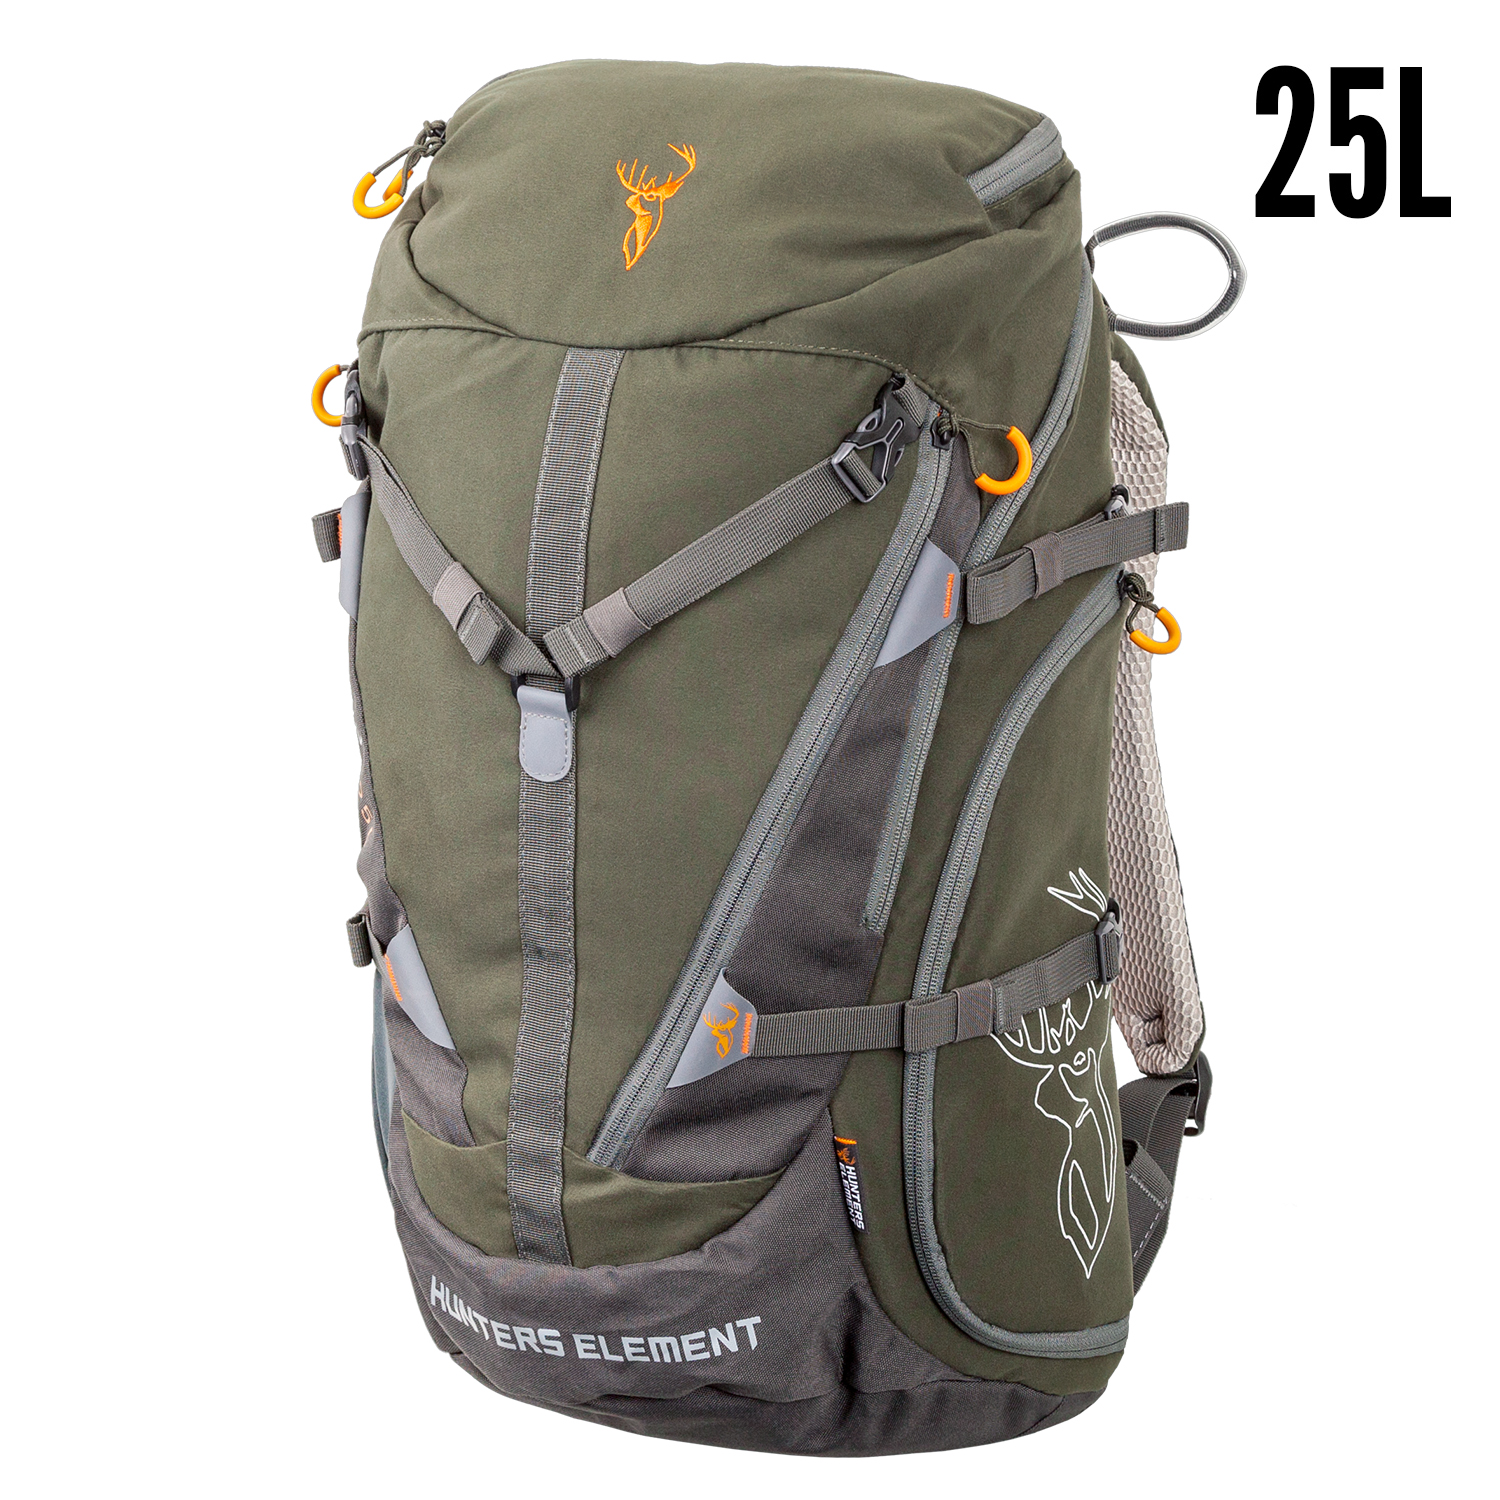 Hunters Element Canyon Pack - Forest Green